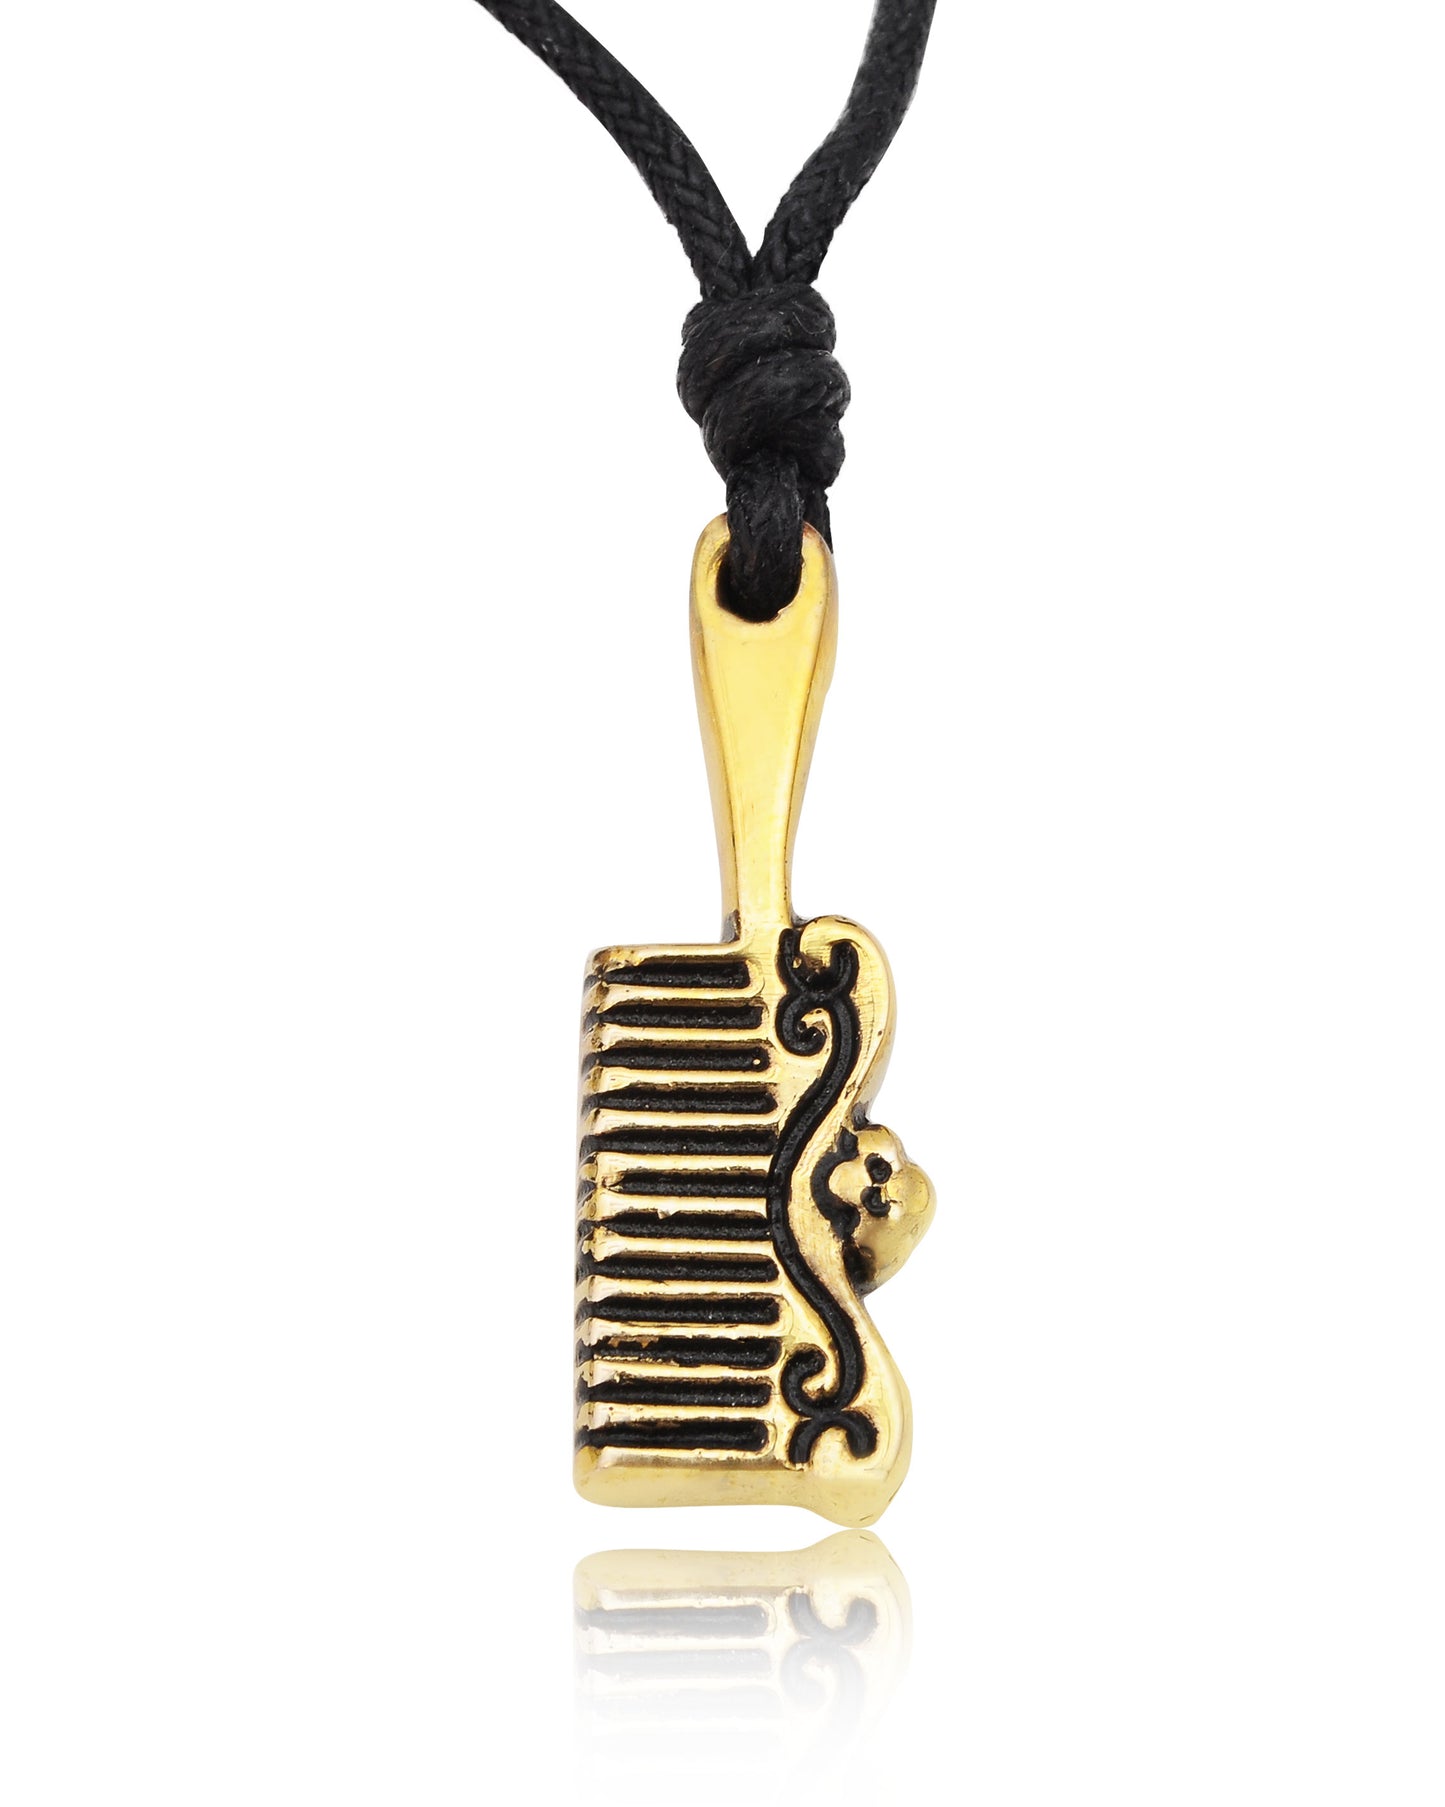 Comb Brush Gold Brass Charm Necklace Pendant Jewelry